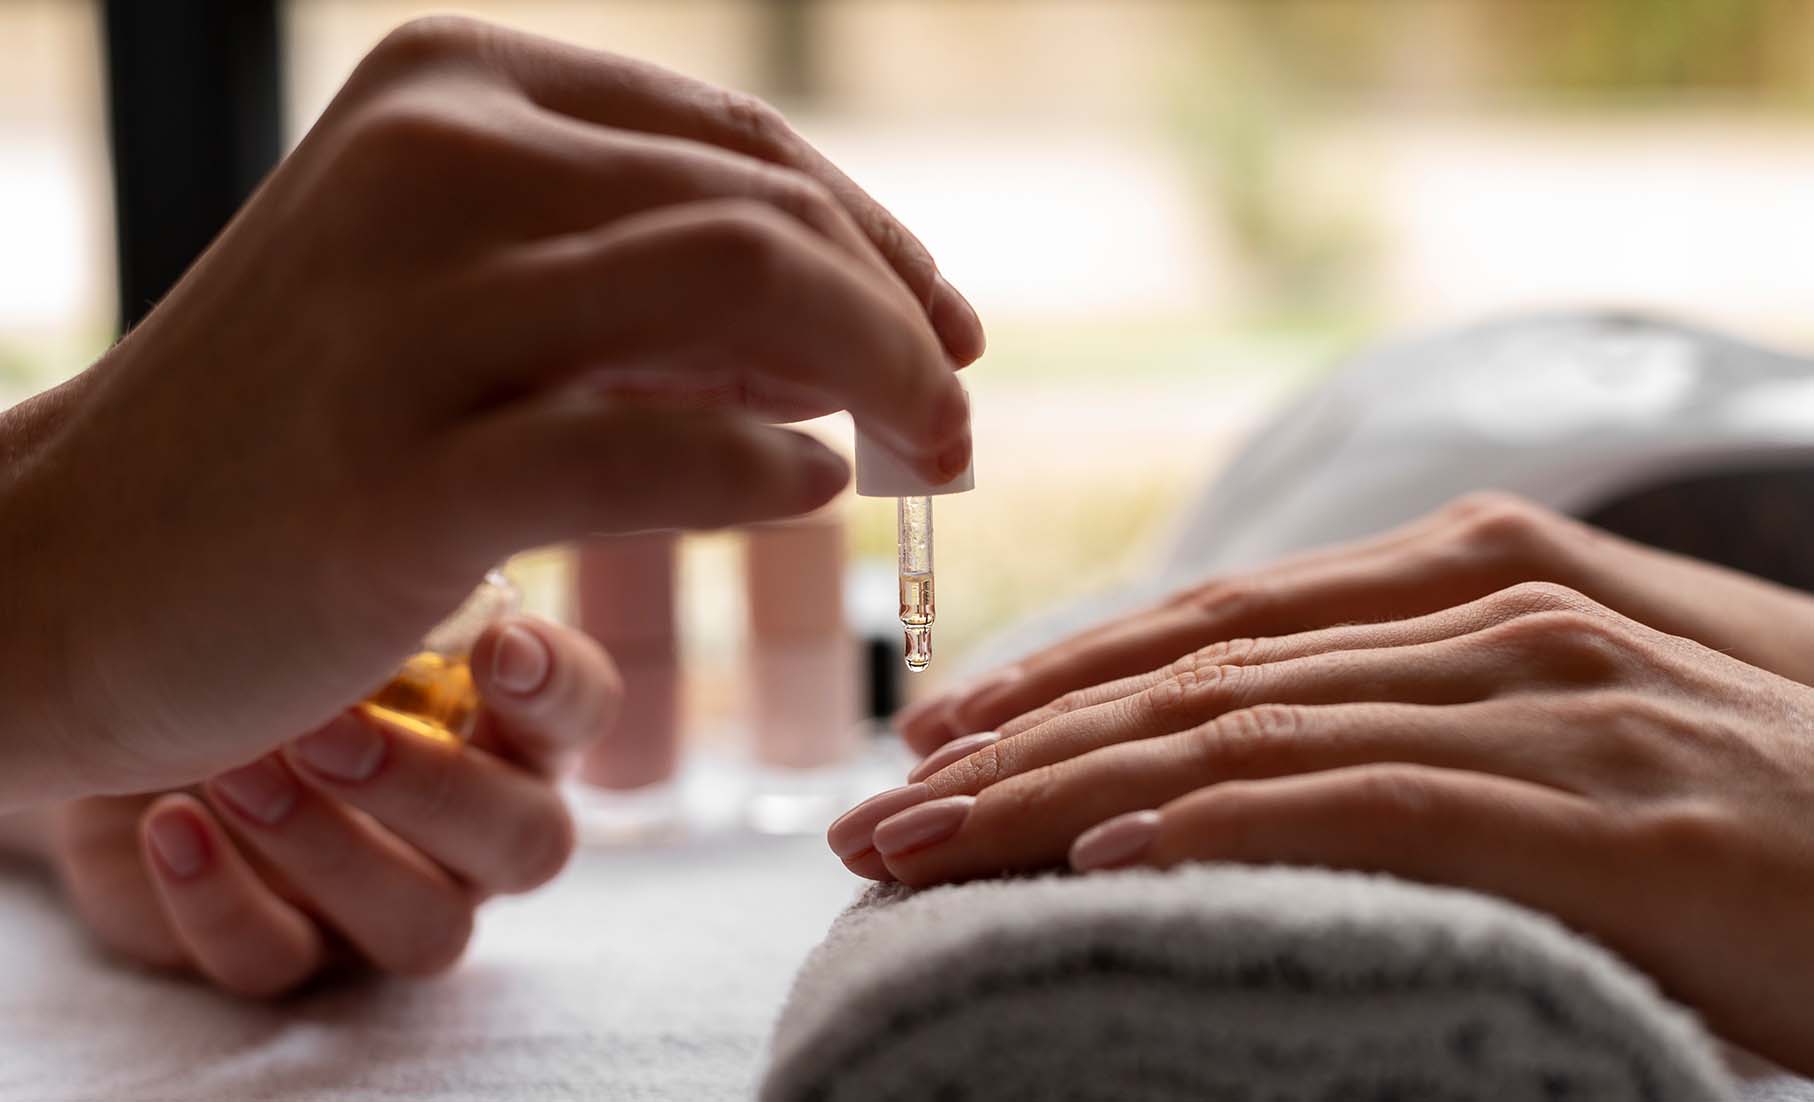 How to Maintain Healthy Nails and Cuticles at Home